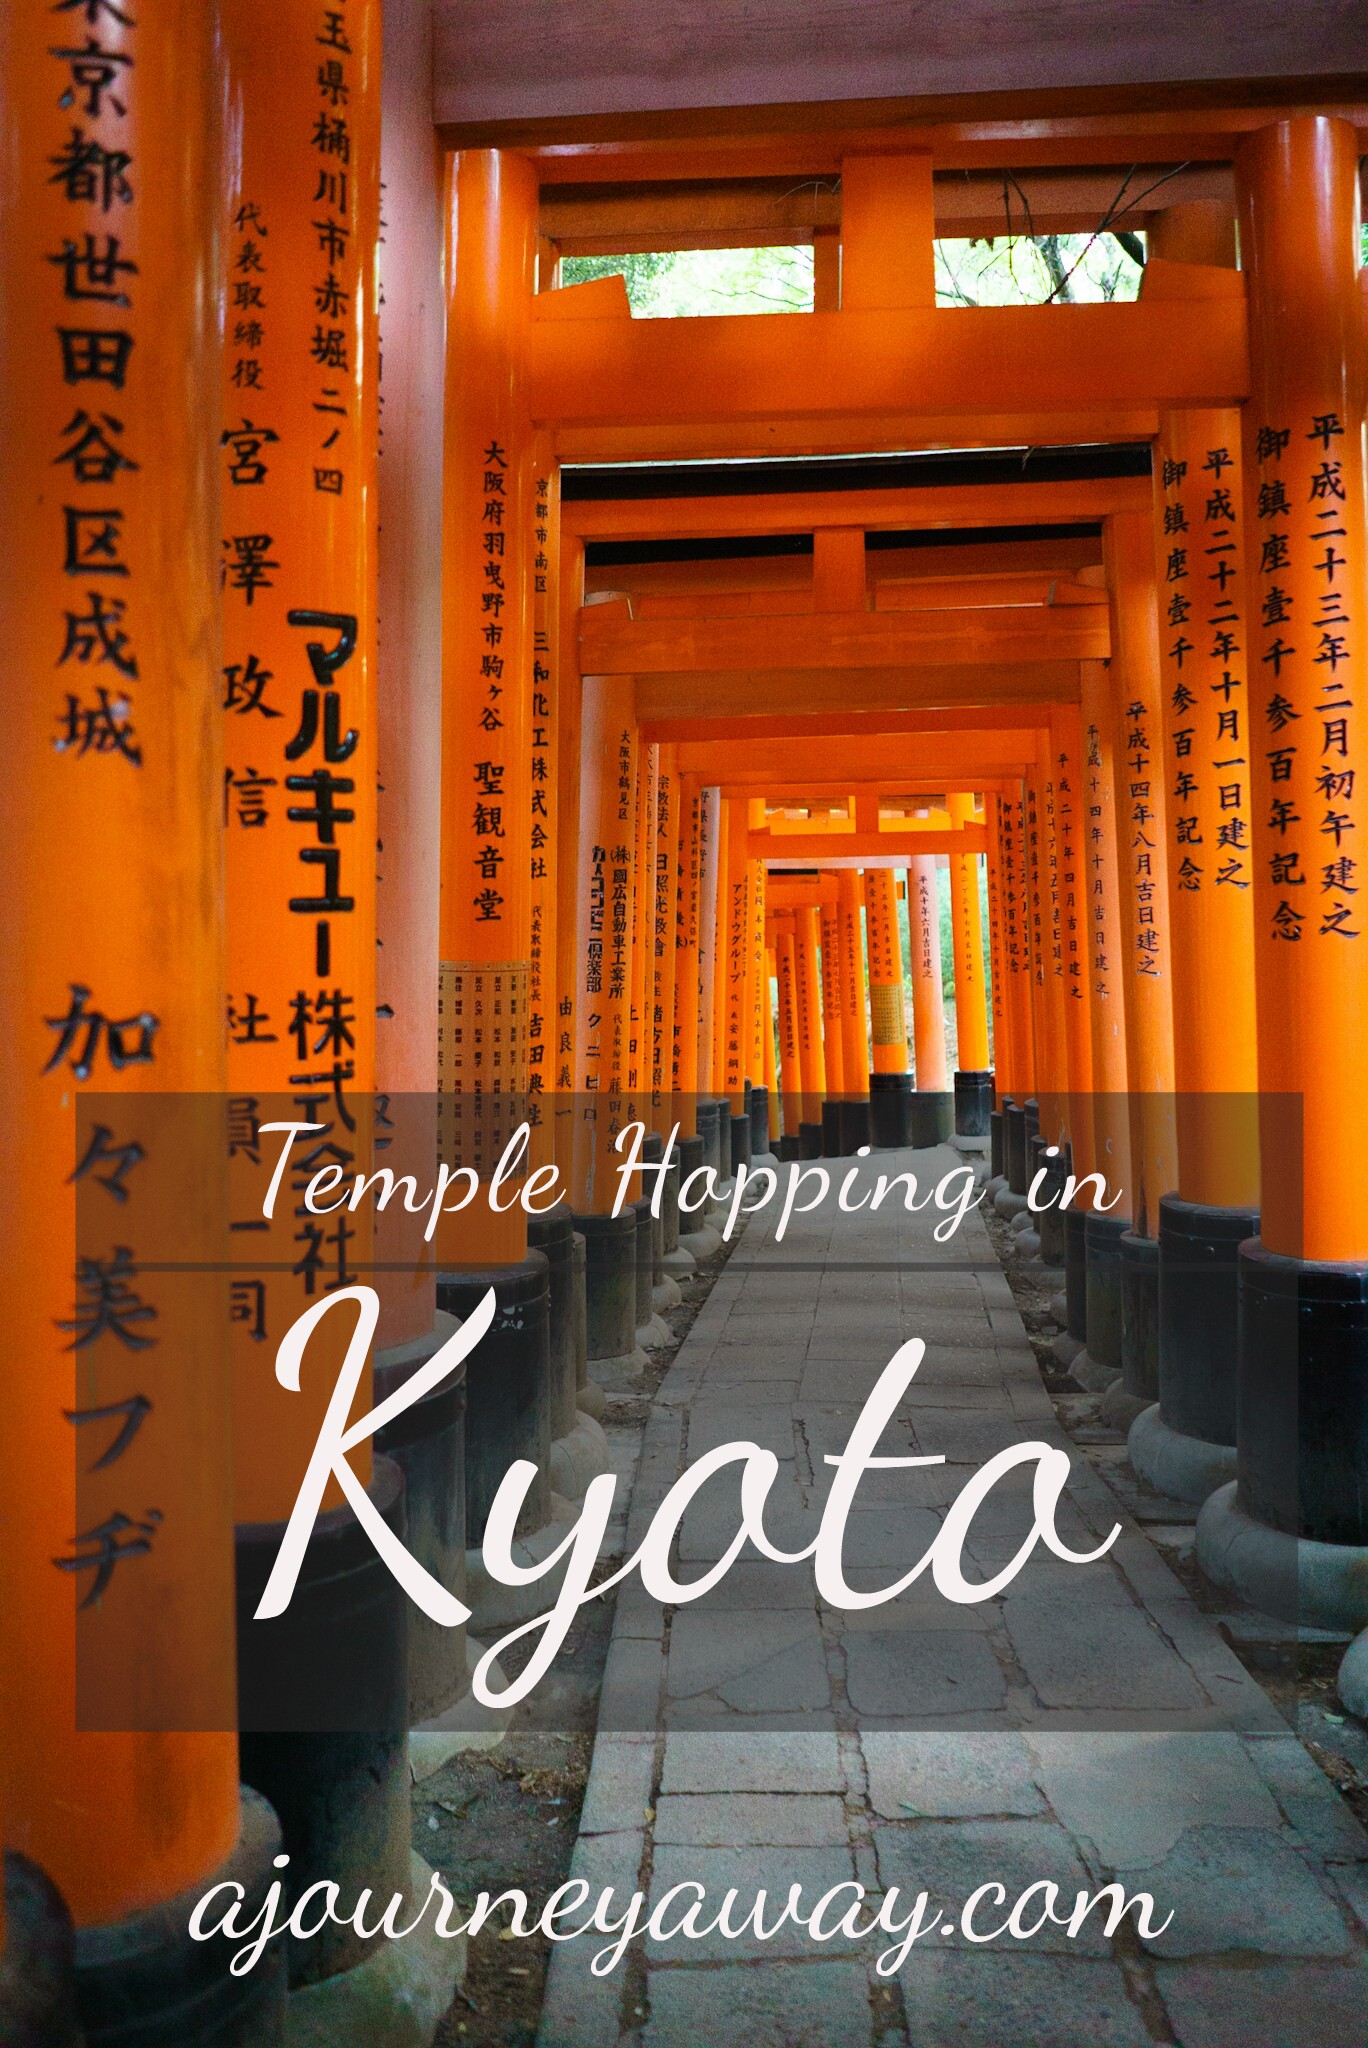 Going temple hopping in Kyoto